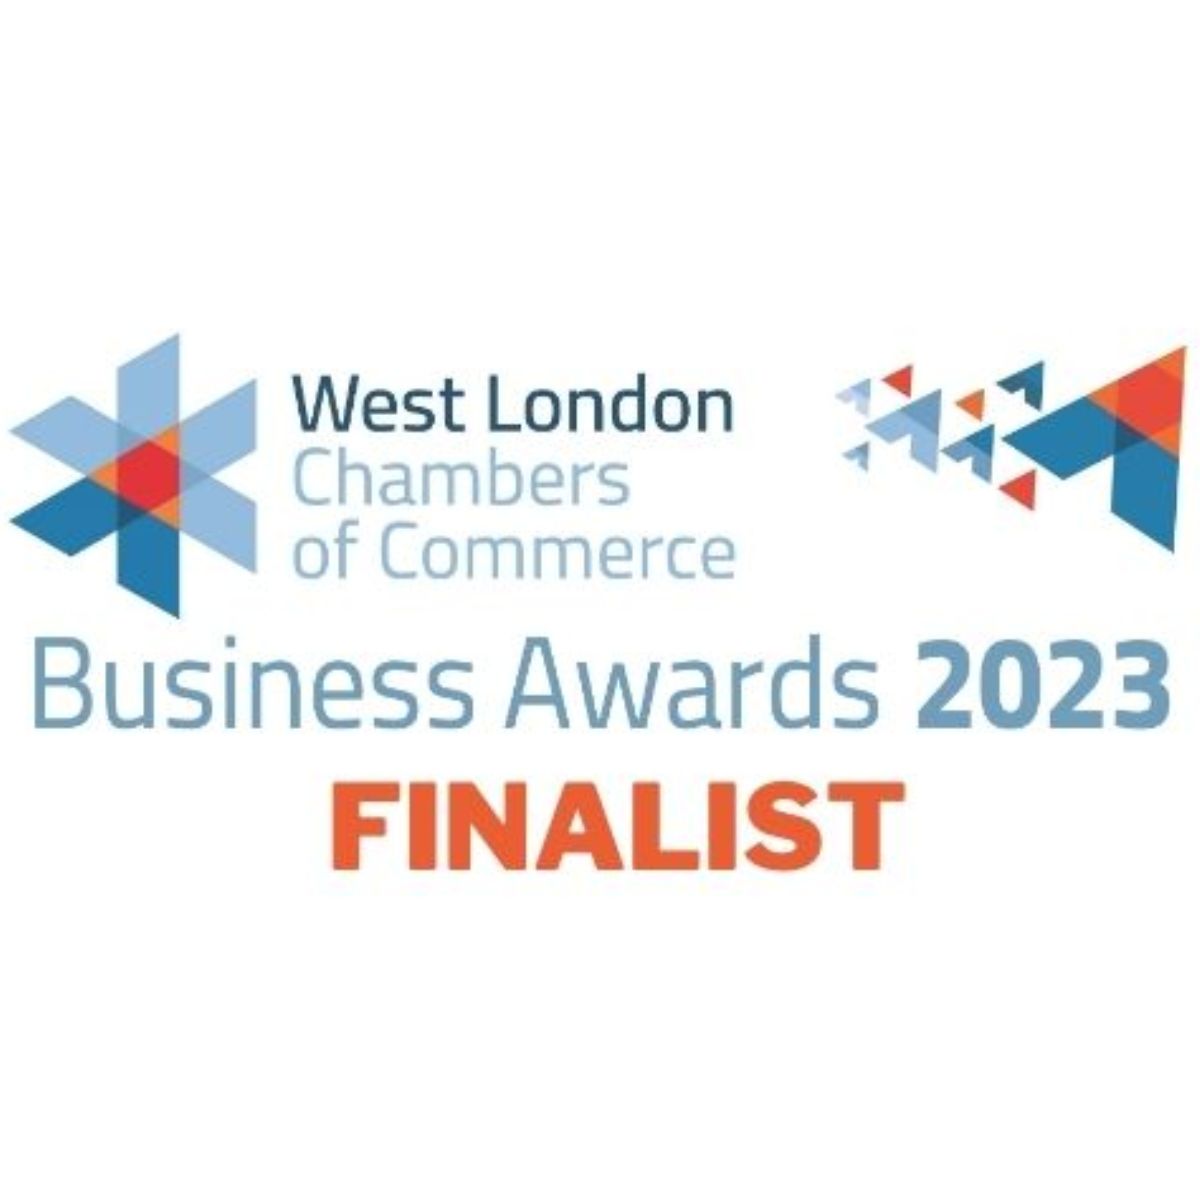 Abstract House Awards Finalist At West London Business Awards 2023